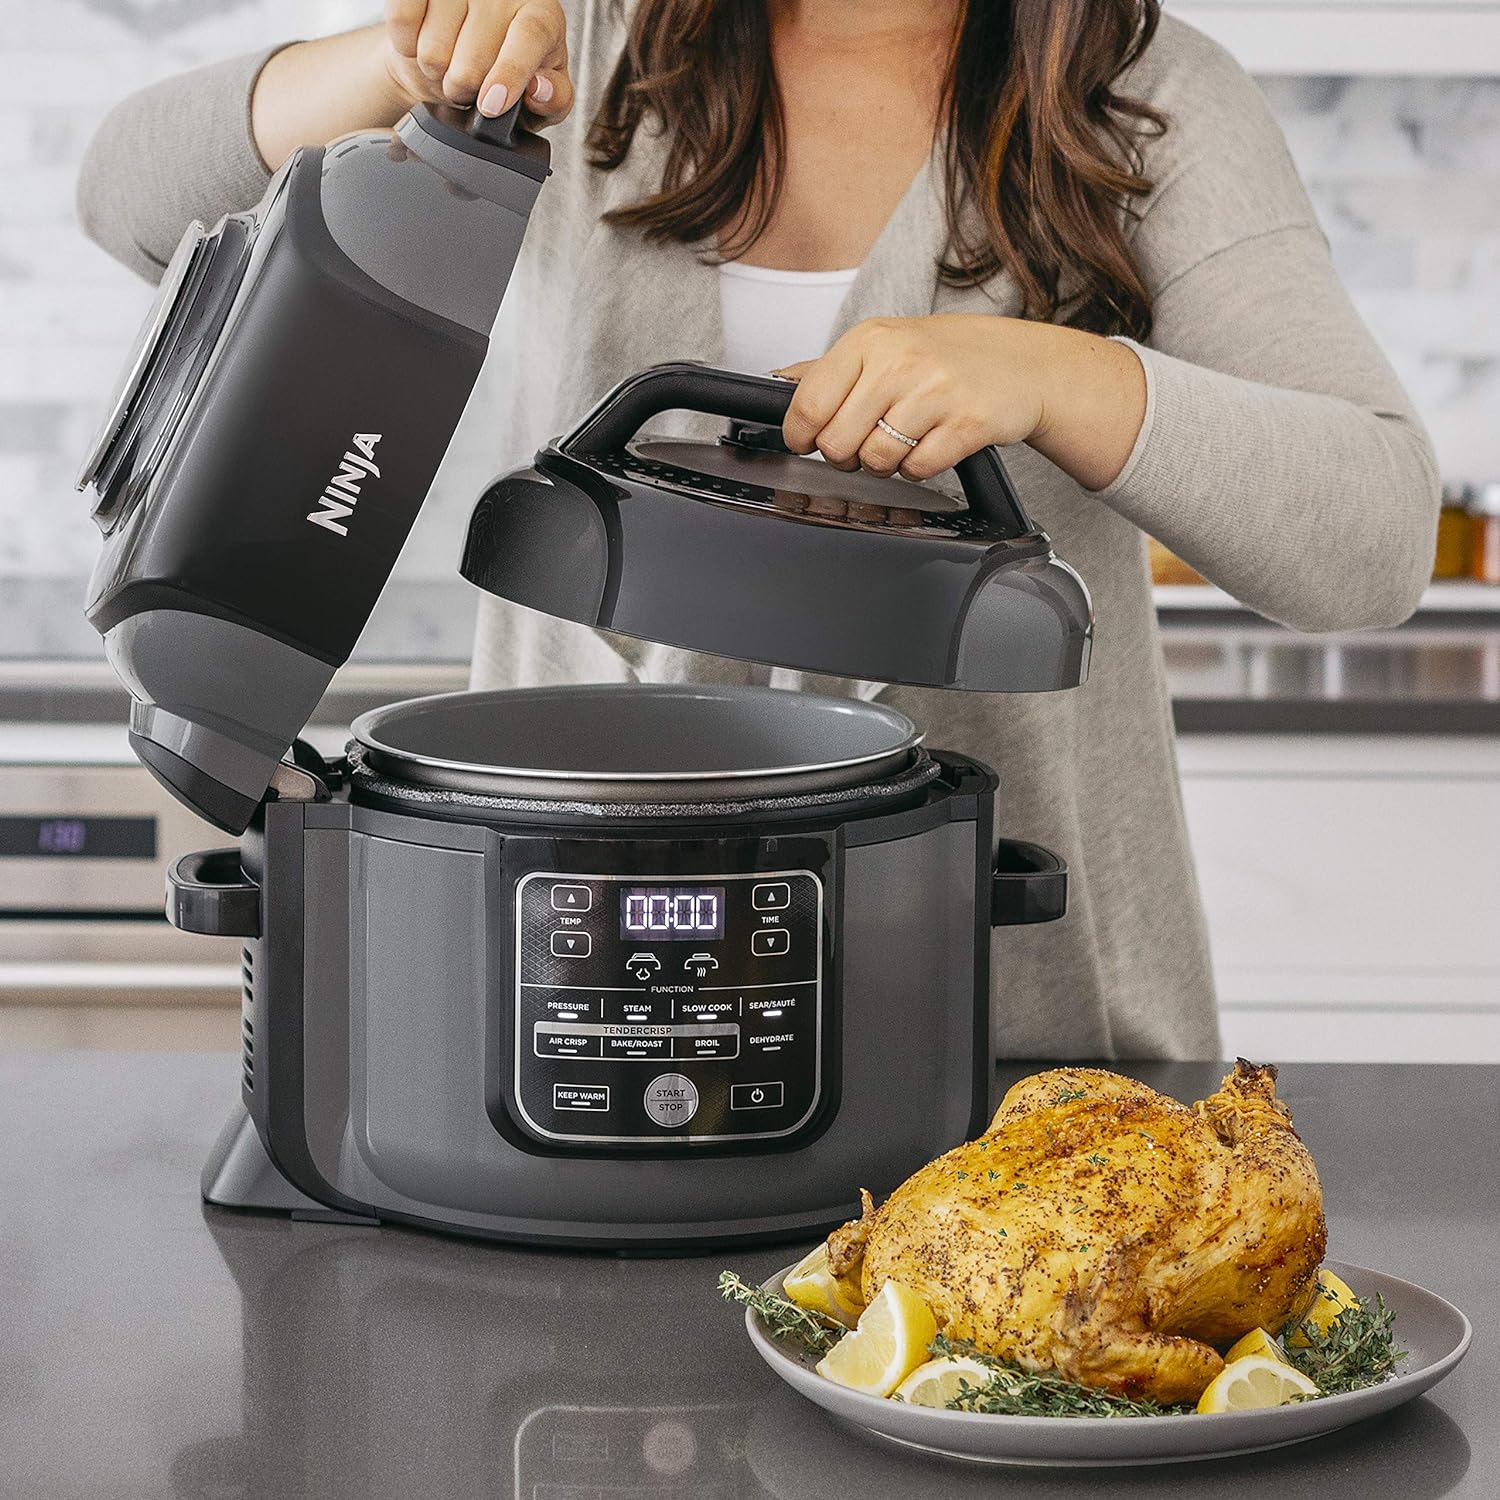 Ninja OP302 Foodi 9-in-1 Pressure, Broil, Dehydrate, Slow Cooker, Air Fryer, and More, with 6.5 Quart Capacity and 45 Recipe Book, and a High Gloss Finish